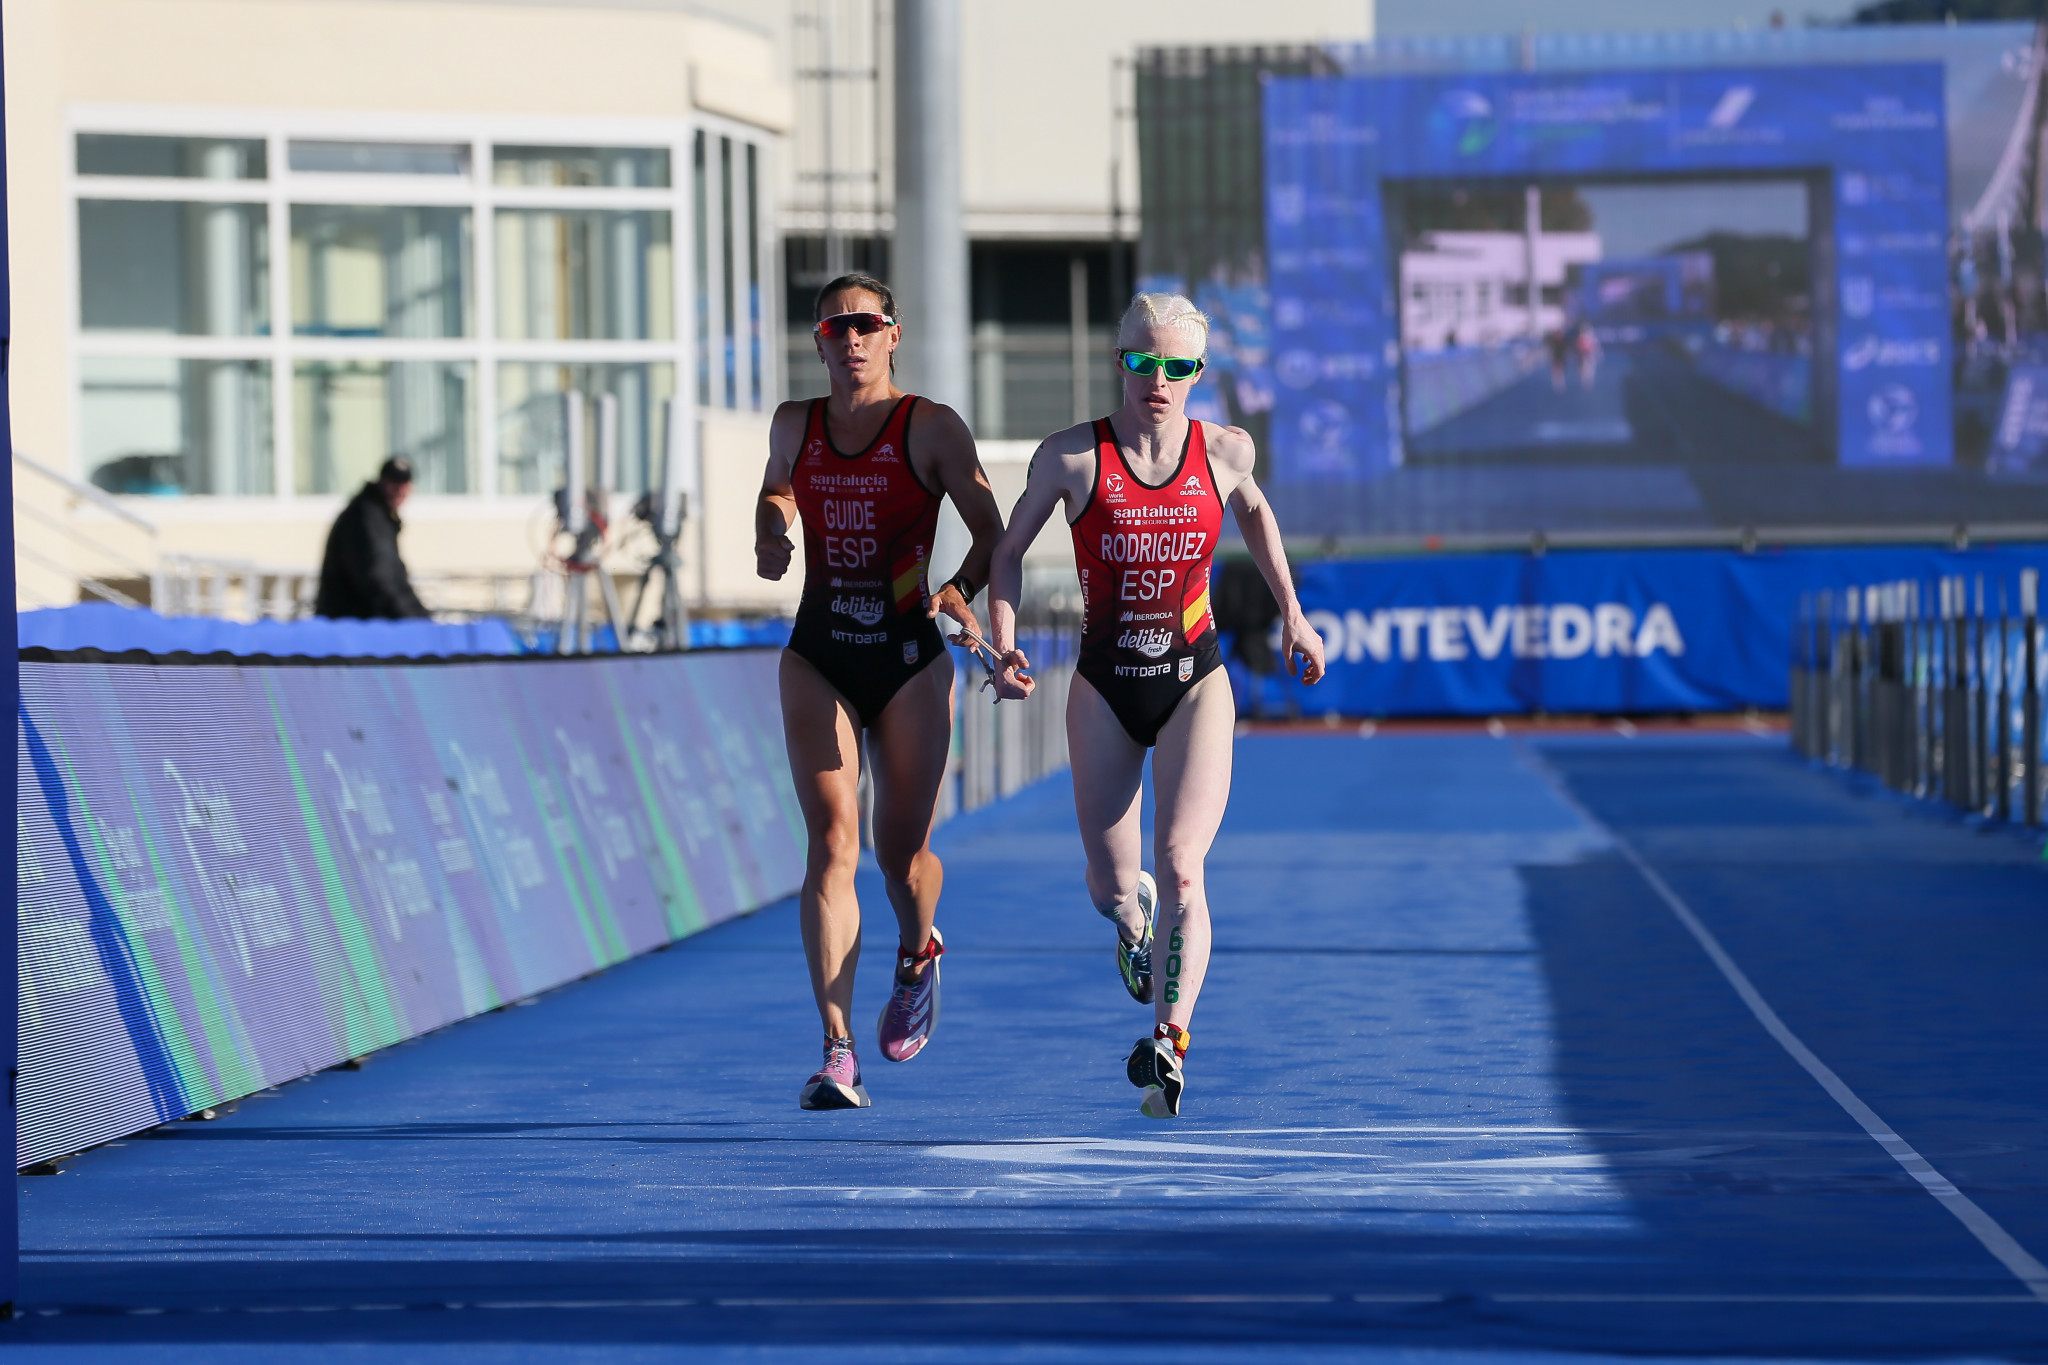 Spanish home favourite Susana Rodríguez, right, missed out on a fifth consecutive women's visually impaired title at the World Triathlon Para Championships after being hit with a penalty, Italy's Francesca Tarantello taking gold ©World Triathlon